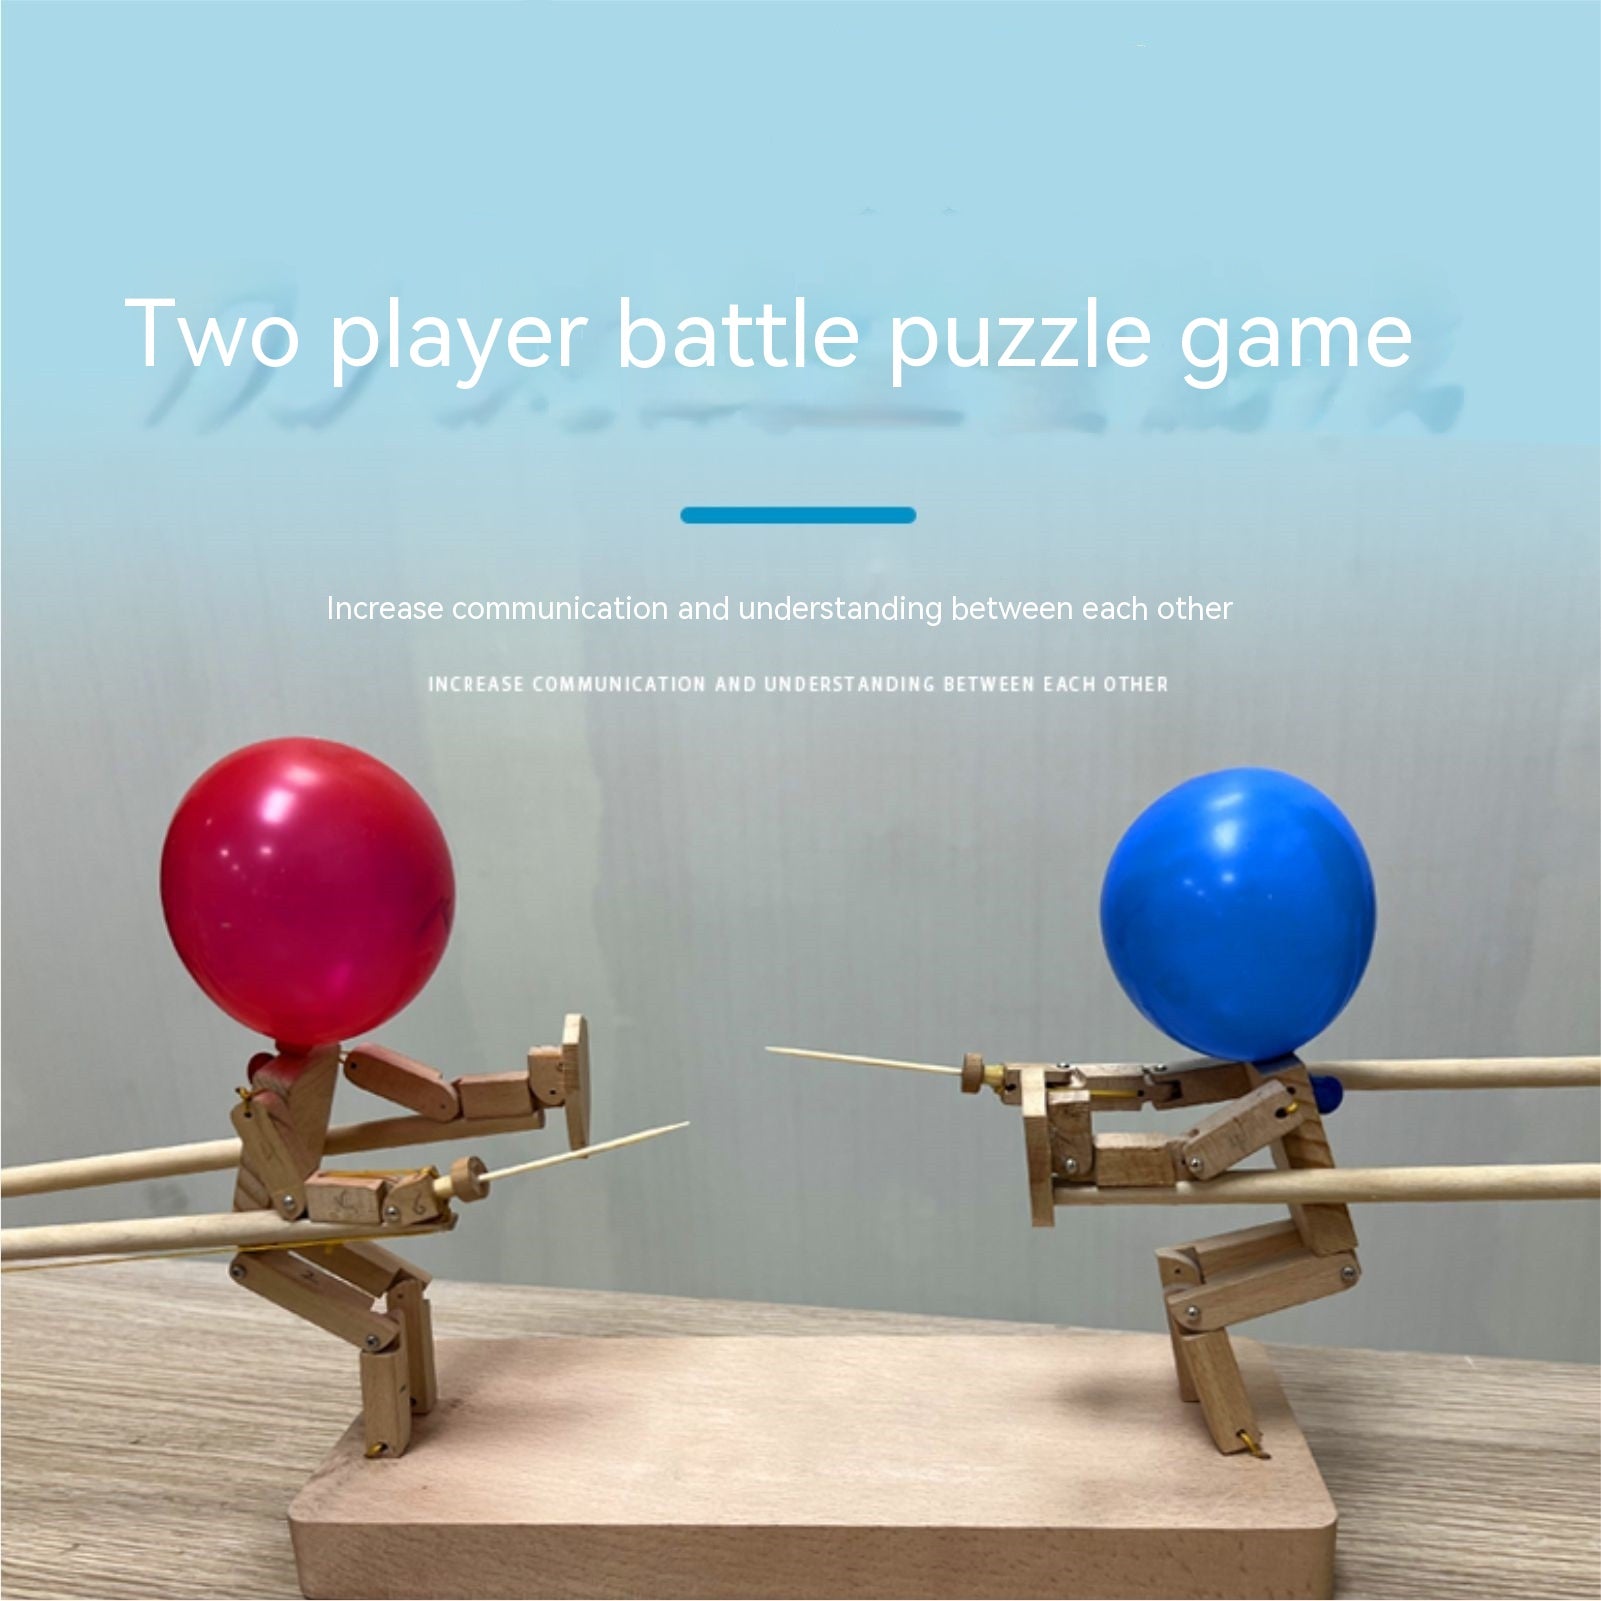  "Experience intense fun with our Wooden Bots Battle, a 2-player Pop The Balloon Fight Game."